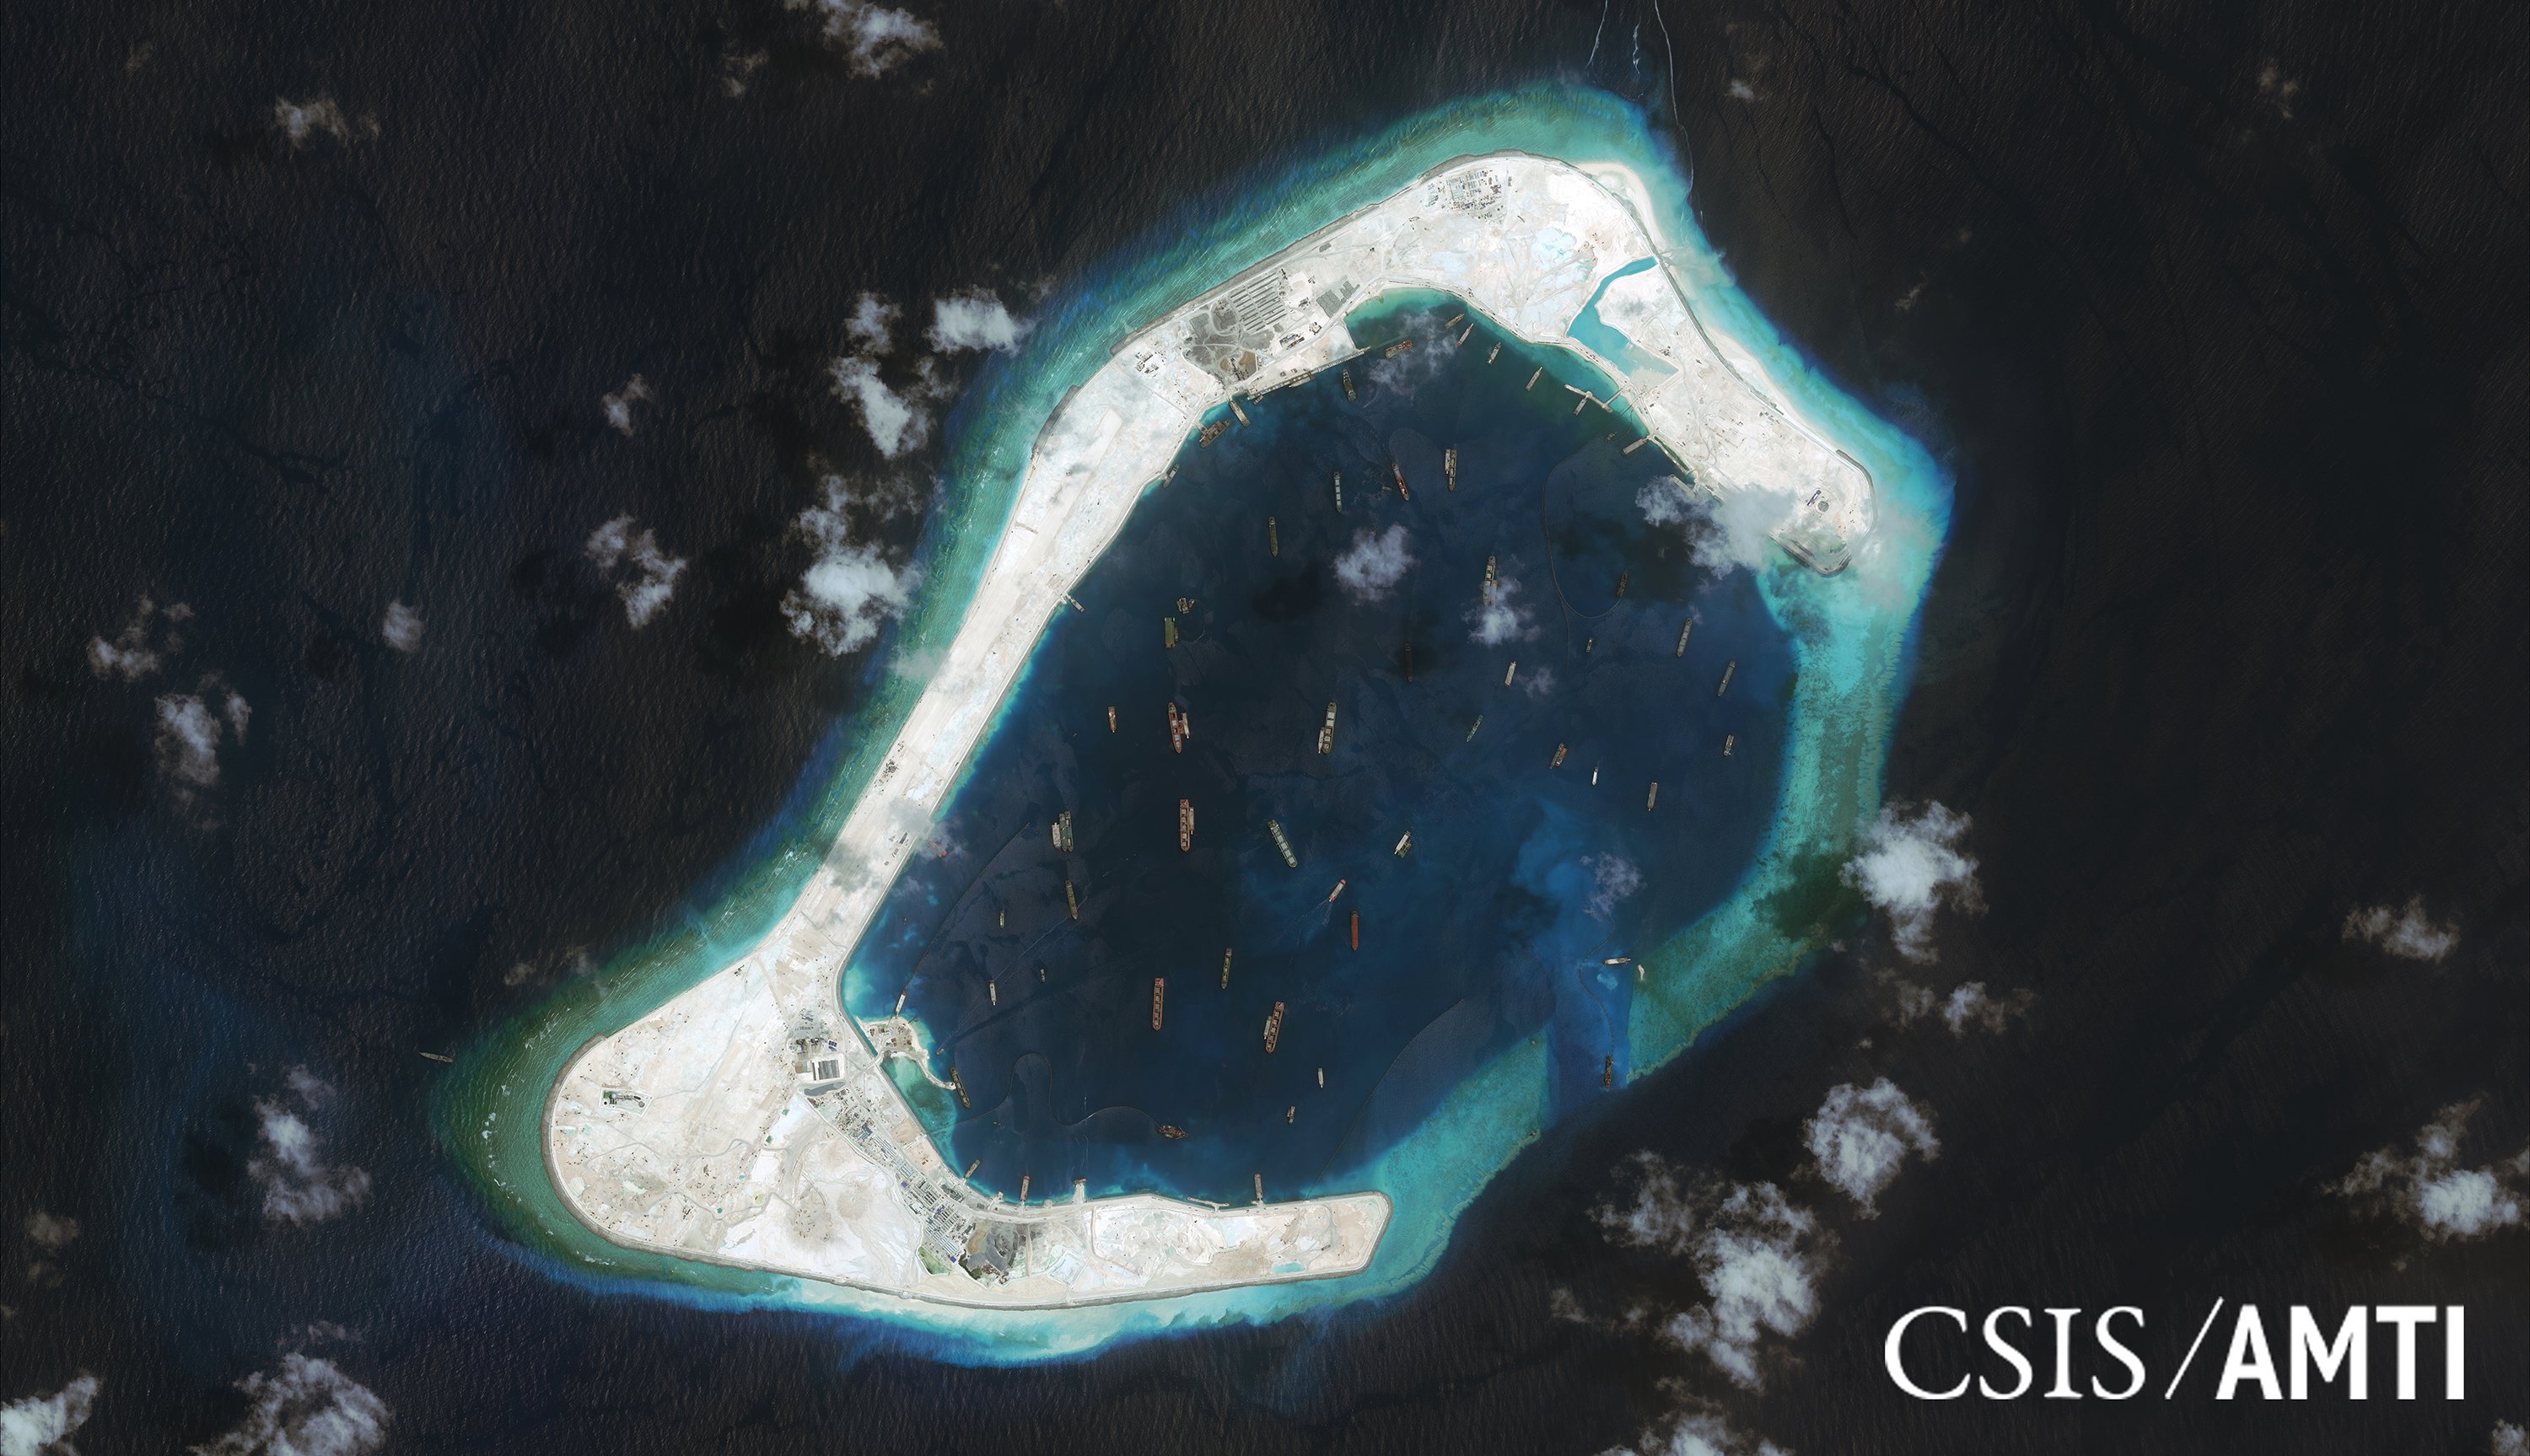 Subi reef, located in the disputed Spratly Islands in the South China Sea, is shown in this handout Center for Strategic and International Studies (CSIS) Asia Maritime Transparency Initiative satellite image taken Sept. 3 and released to Reuters Tuesday. | REUTERS / CSIS ASIA MARITIME TRANSPARENCY INITIATIVE / DIGITALGLOBE / HANDOUT VIA REUTERS